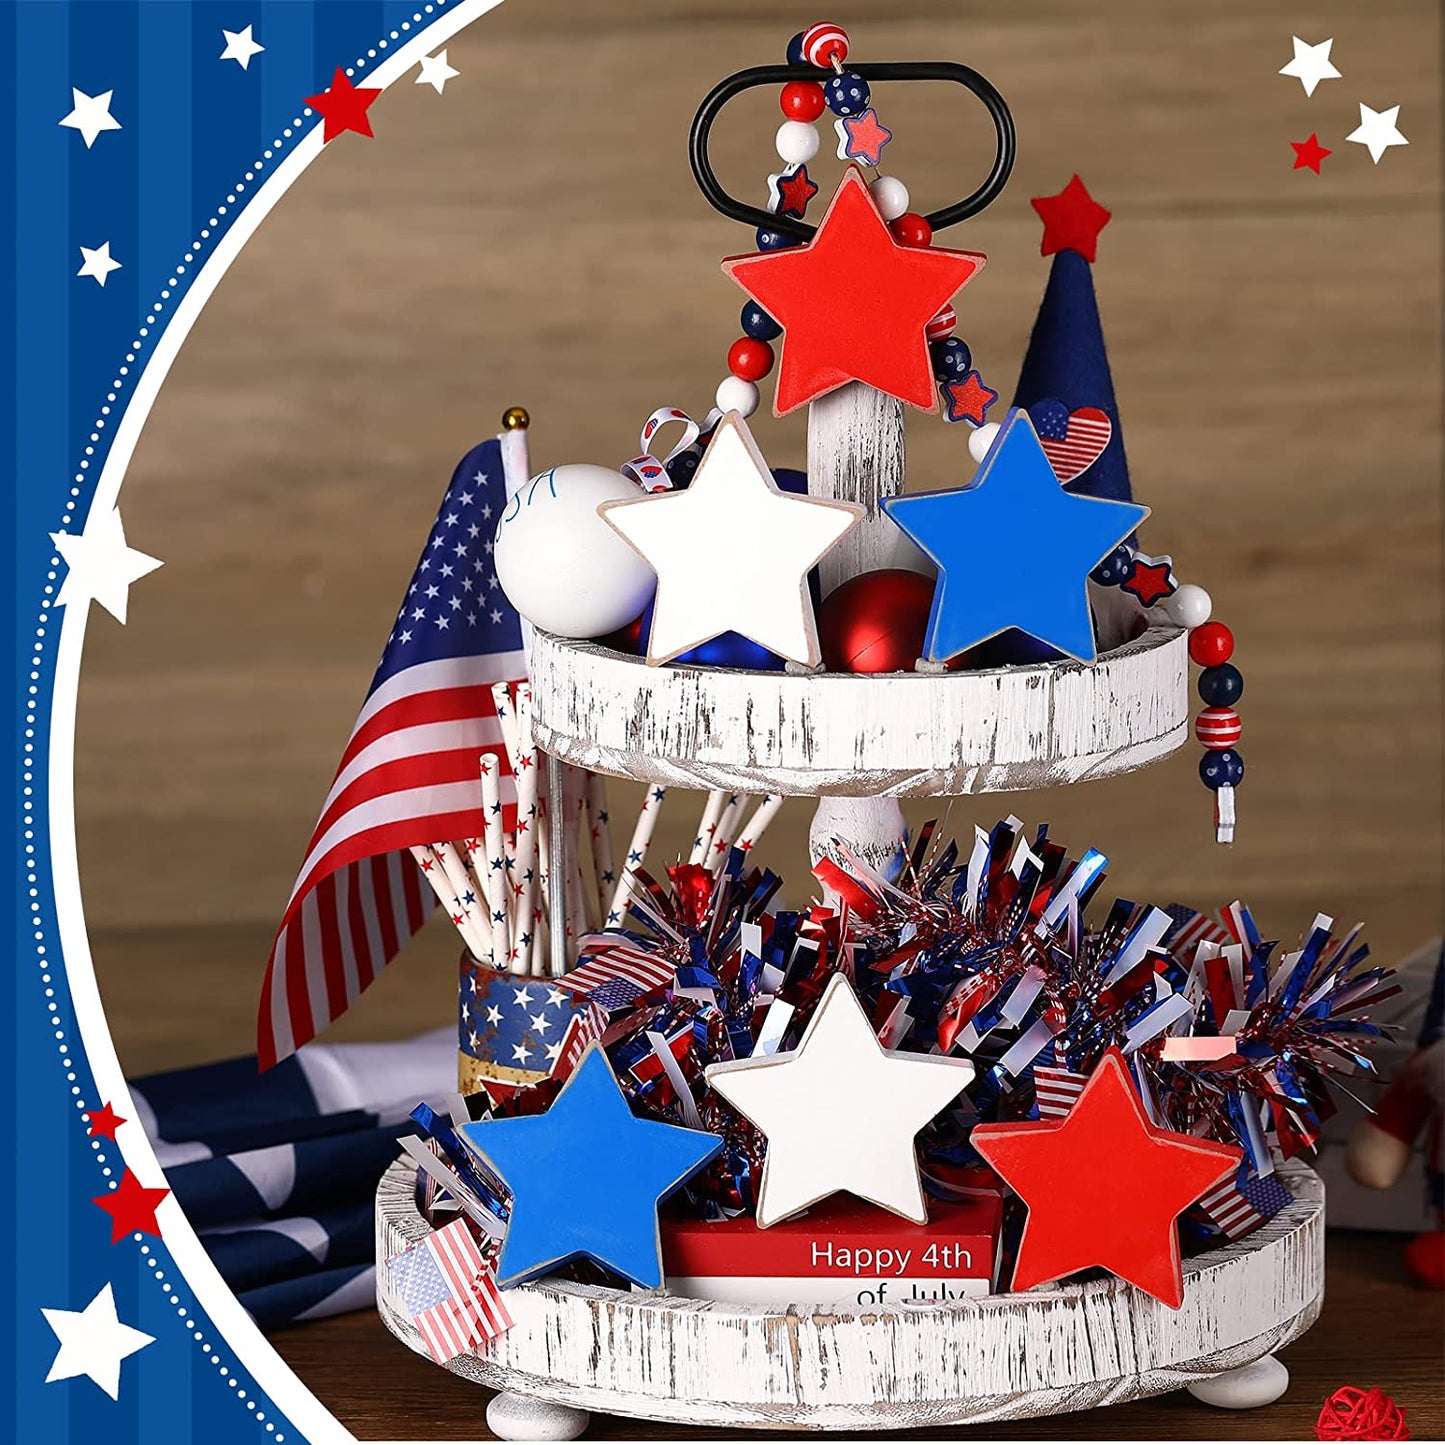 Patriotic Wooden Star 4th of July Wood Star Independence Day Home Table Decor Wood Star Standing Blocks for Home Tabletop Memorial Day Festival Celebration (Vintage)